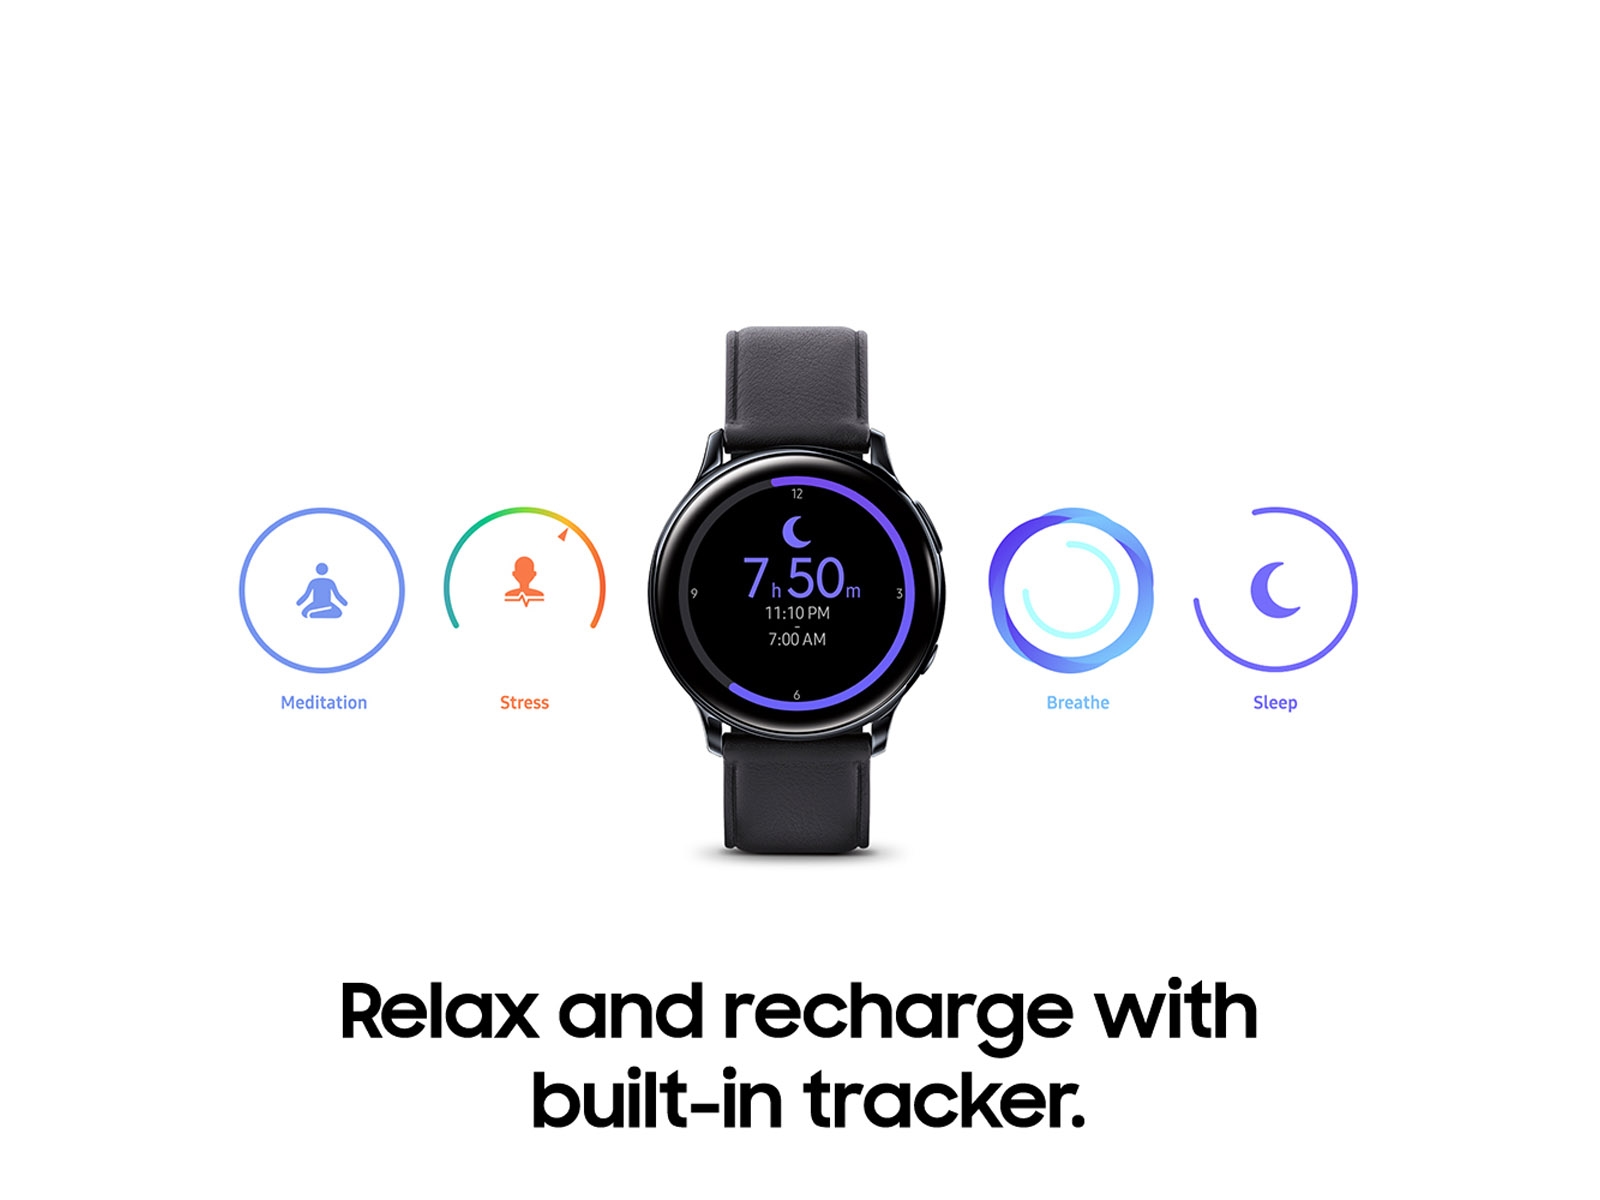 Thumbnail image of Galaxy Watch Active2 (40mm), Pink Gold (Bluetooth)